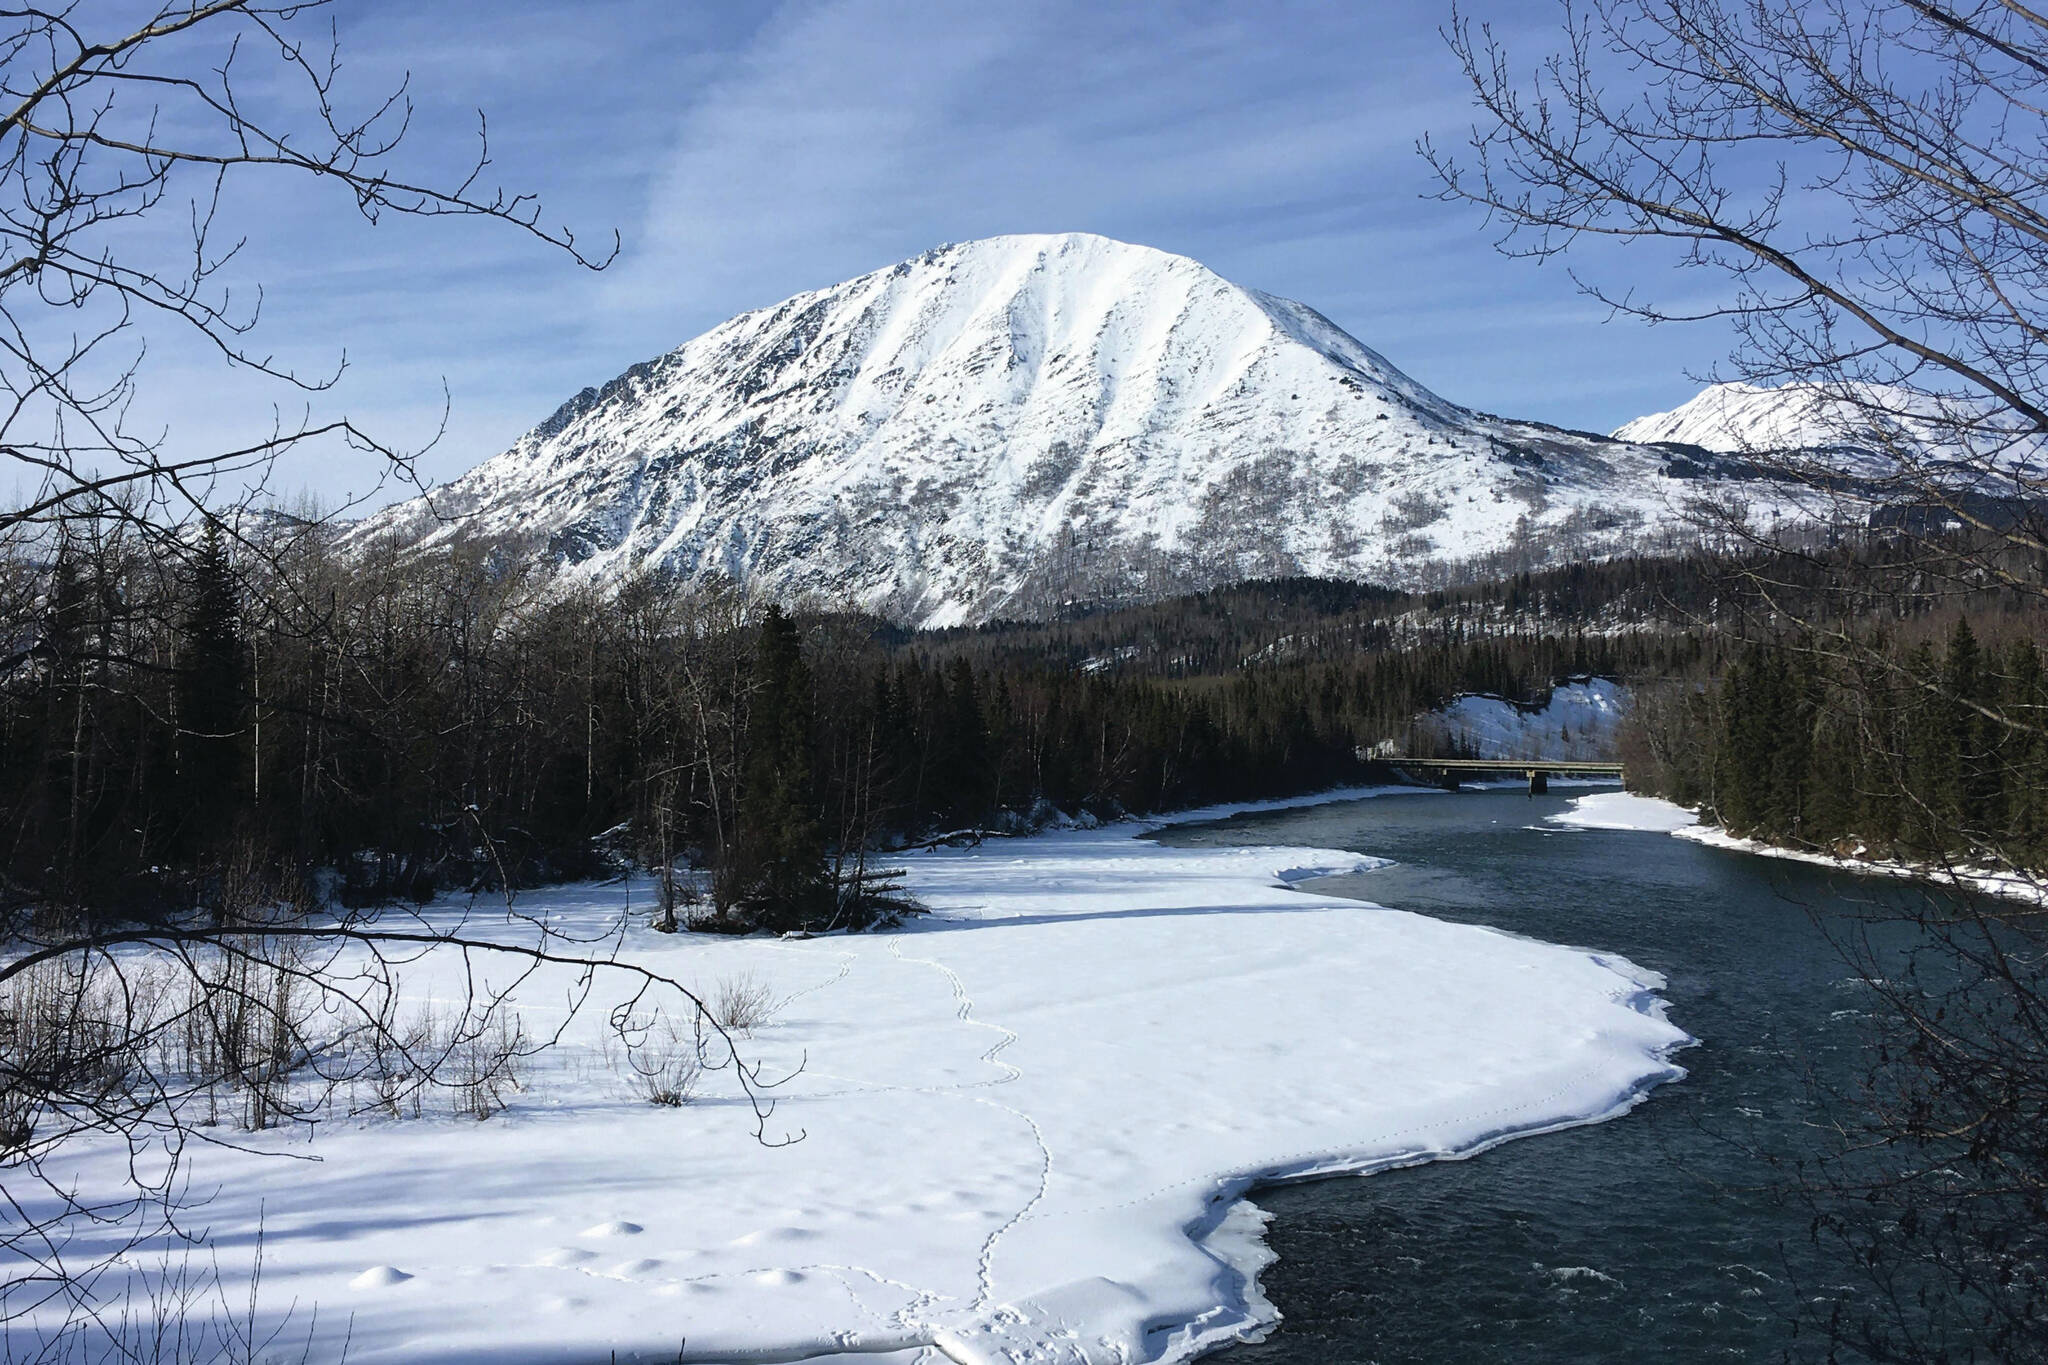 Jeff Helminiak/Peninsula Clarion
The Sterling Highway crosses the Kenai River near the Russian River Campground on March 15, 2020, near Cooper Landing, Alaska.